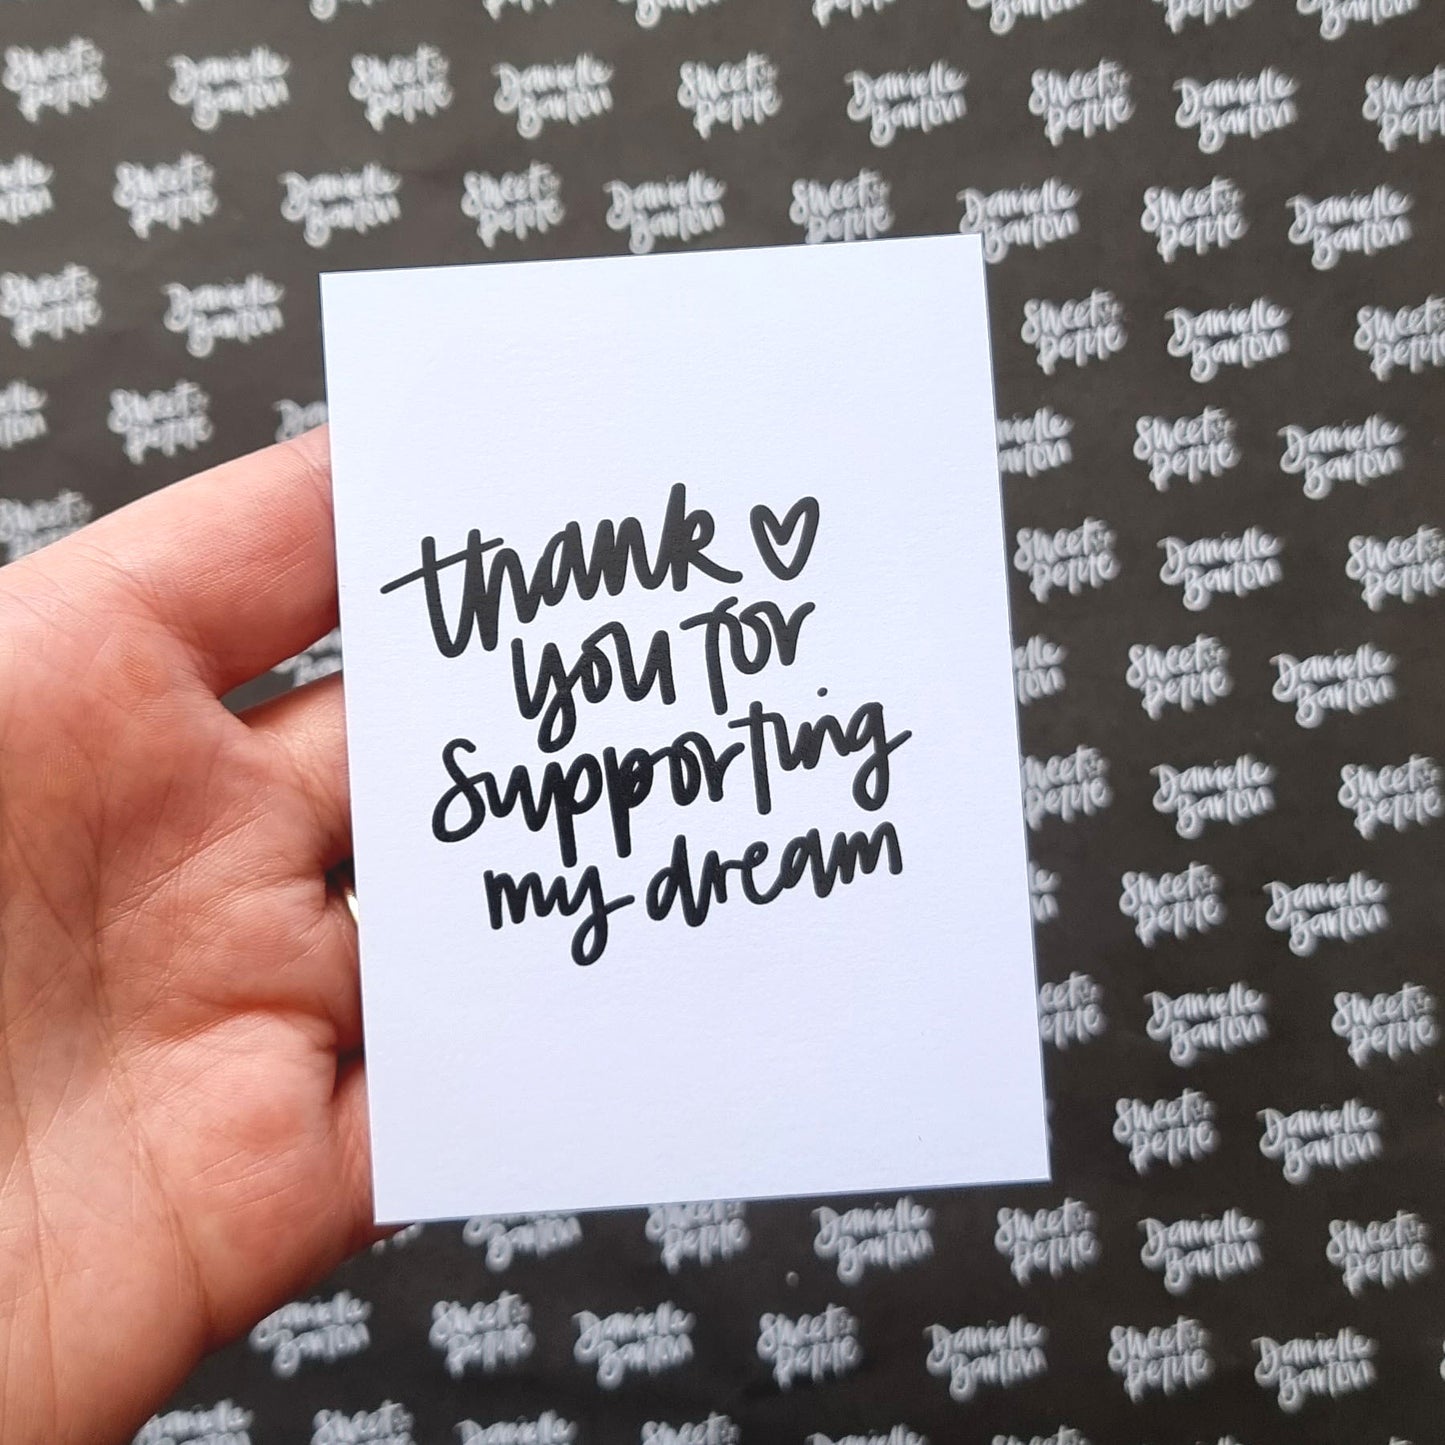 A7 Business Thank You Cards | Thank you for supporting my dream | by Sweet Petite